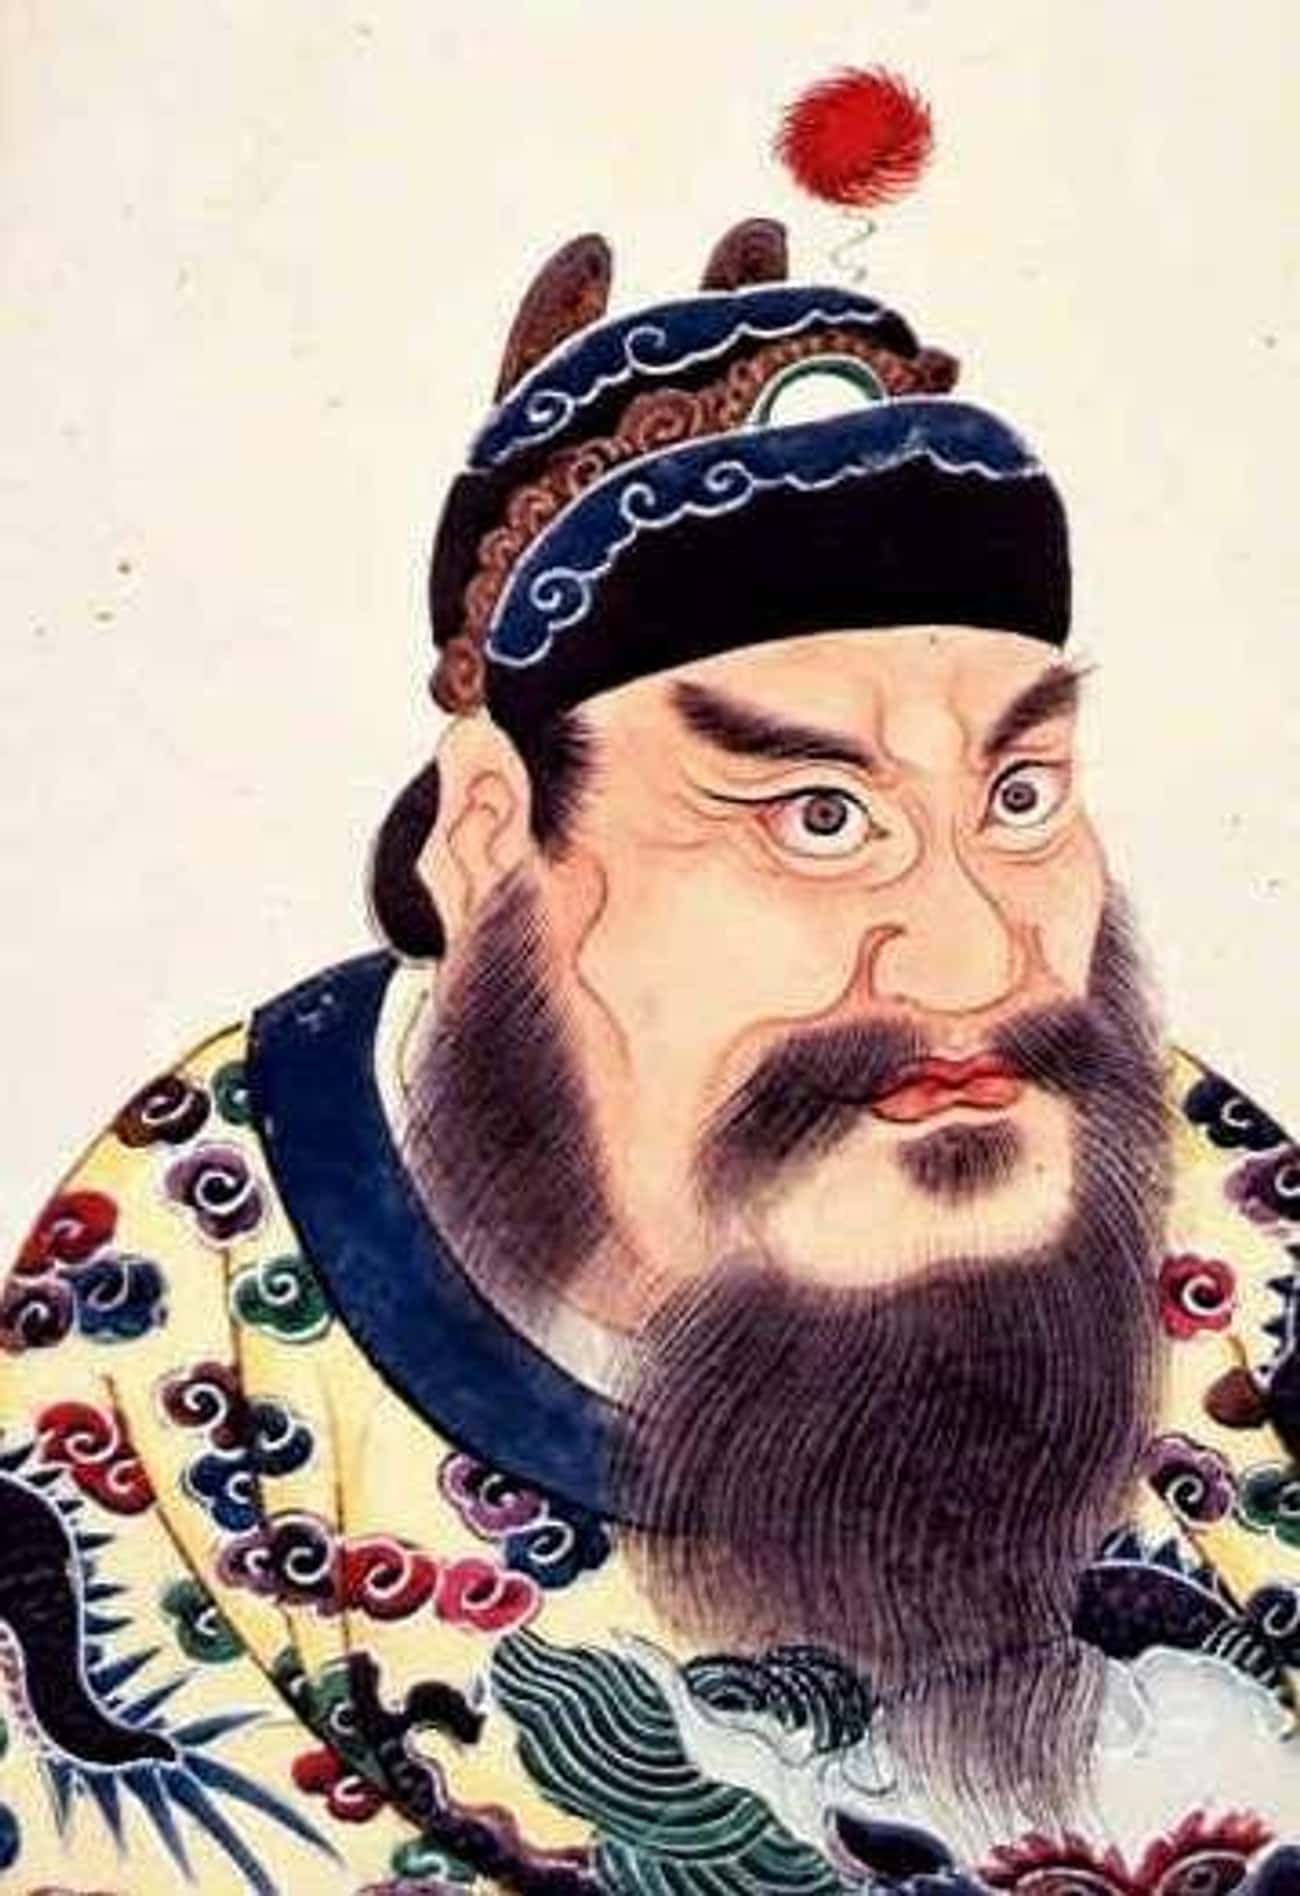 Qin Shi Huang Died Of Mercury Poisoning In His Attempt To Achieve Immortality